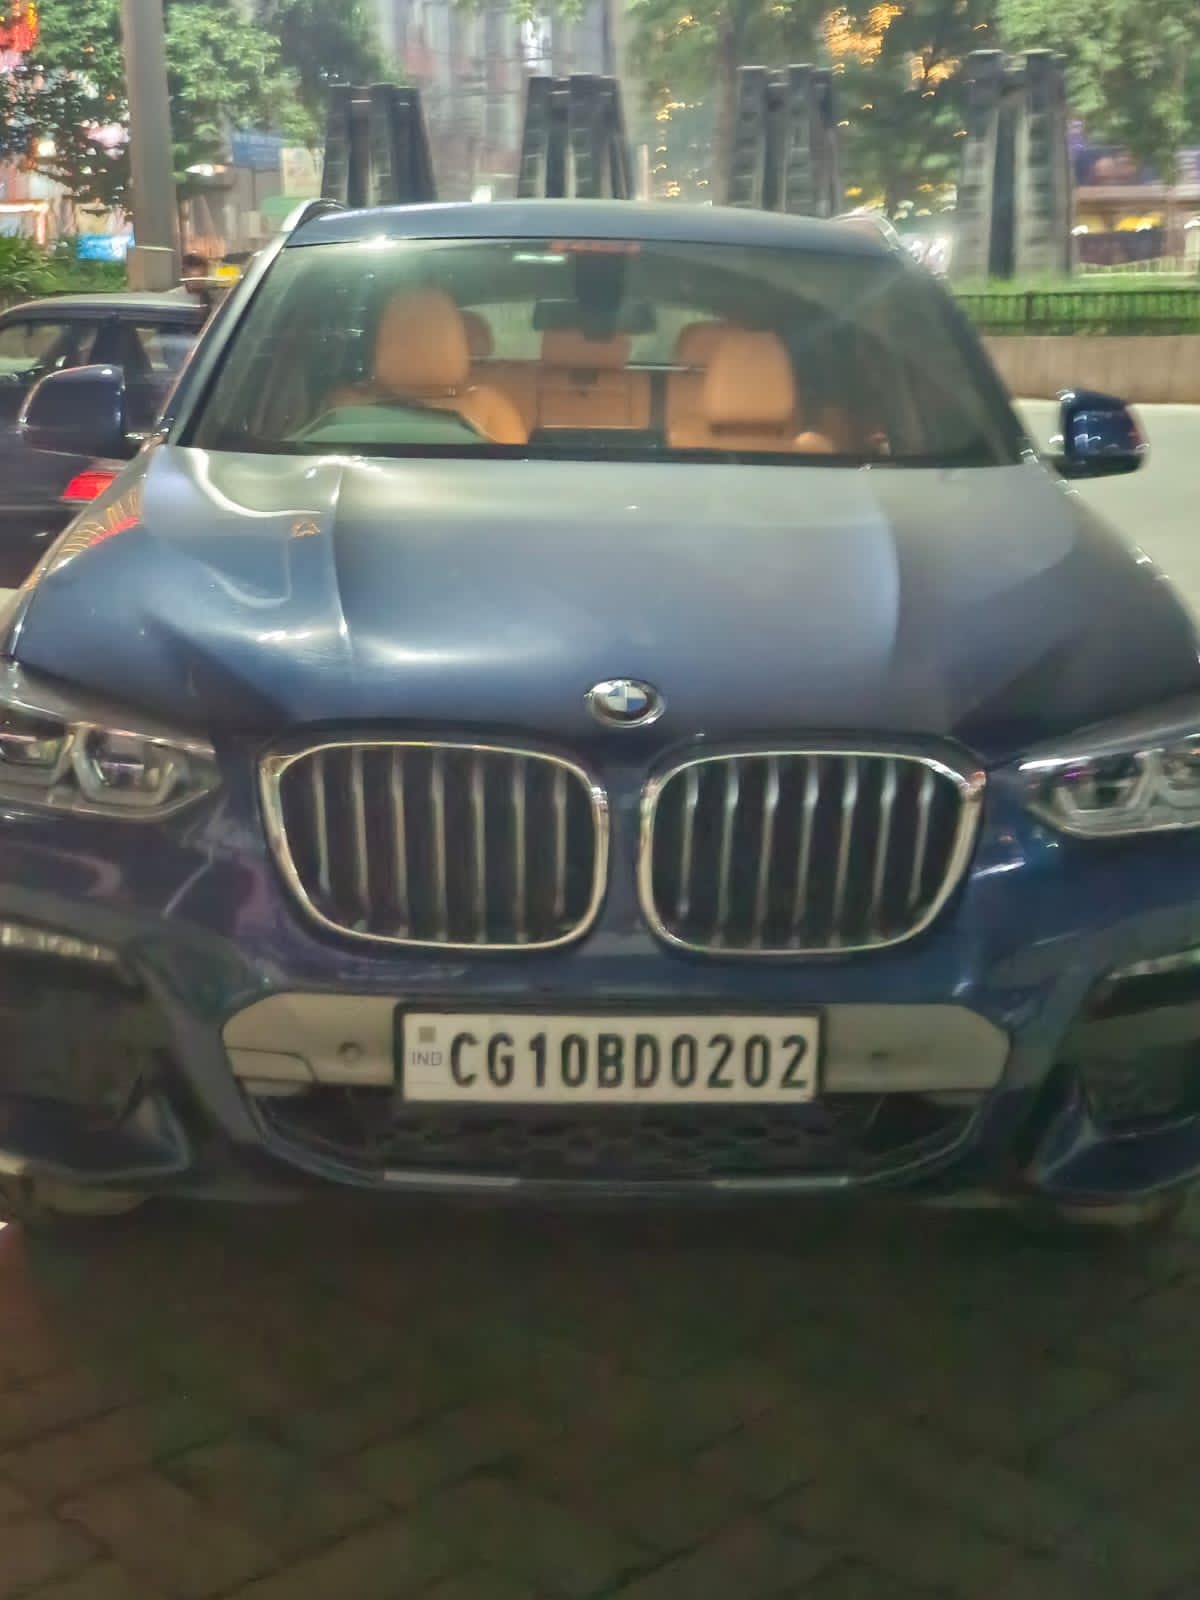 BMW car seized from accused